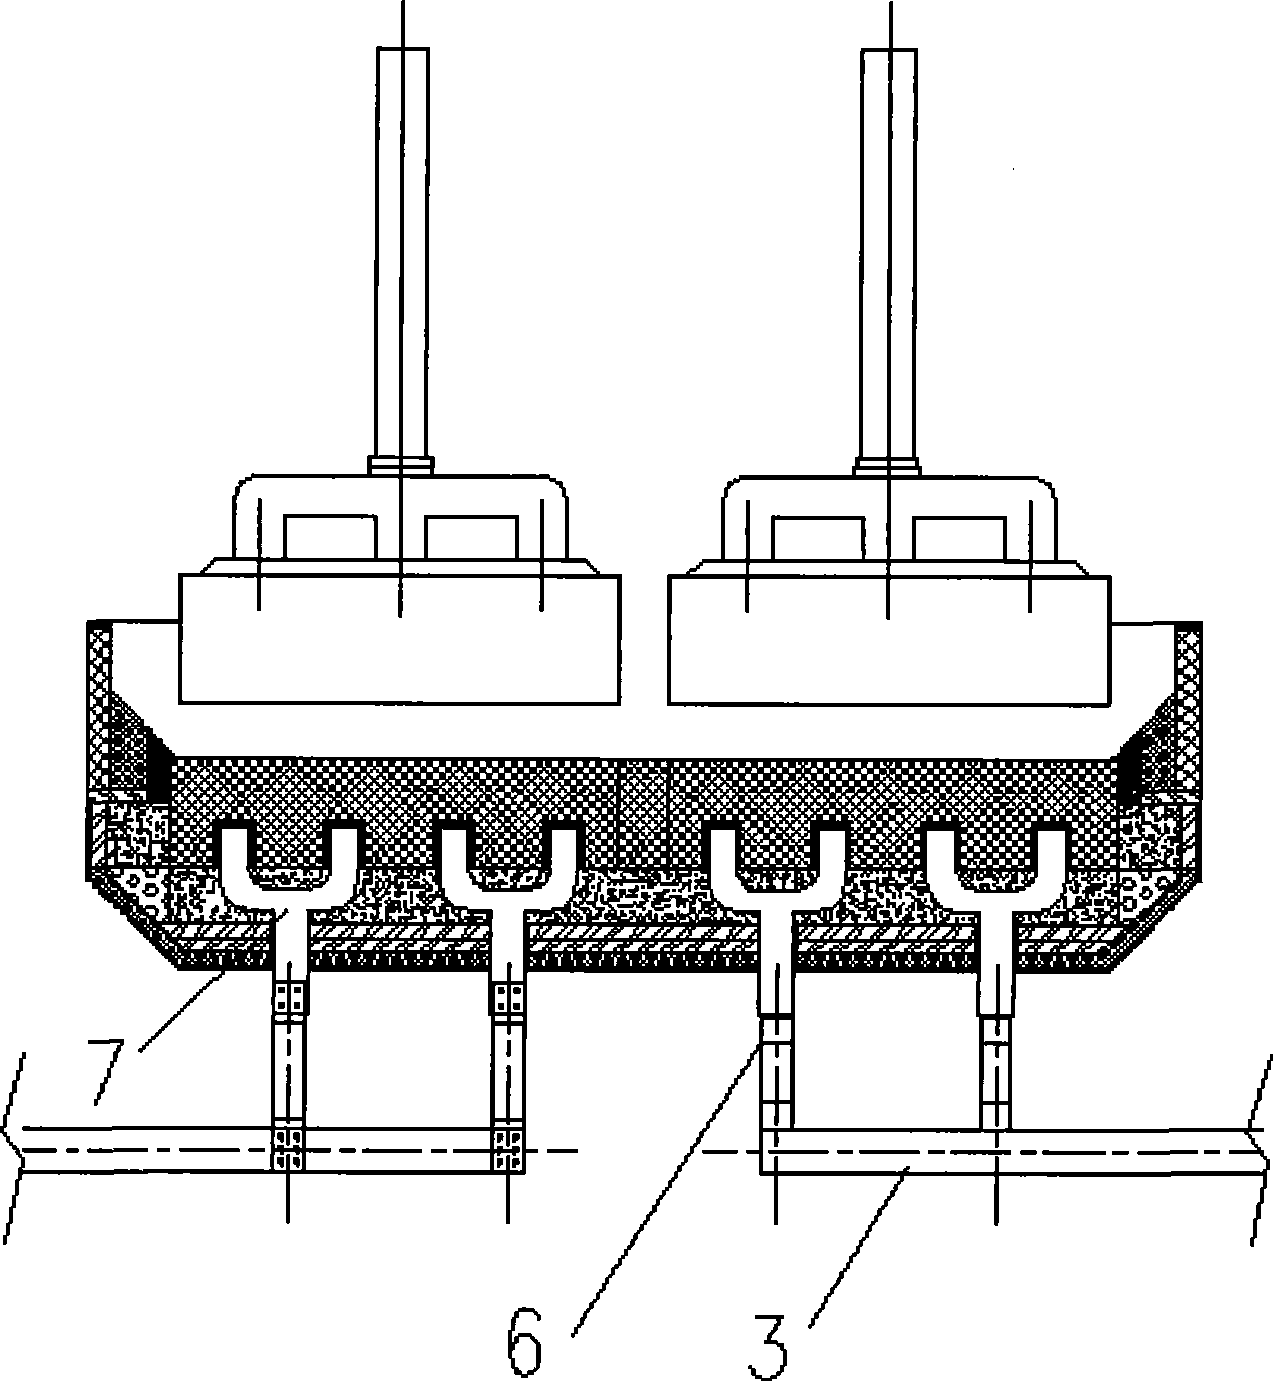 Aluminum cell bus-bar compensation structure with outlet at cell bottom